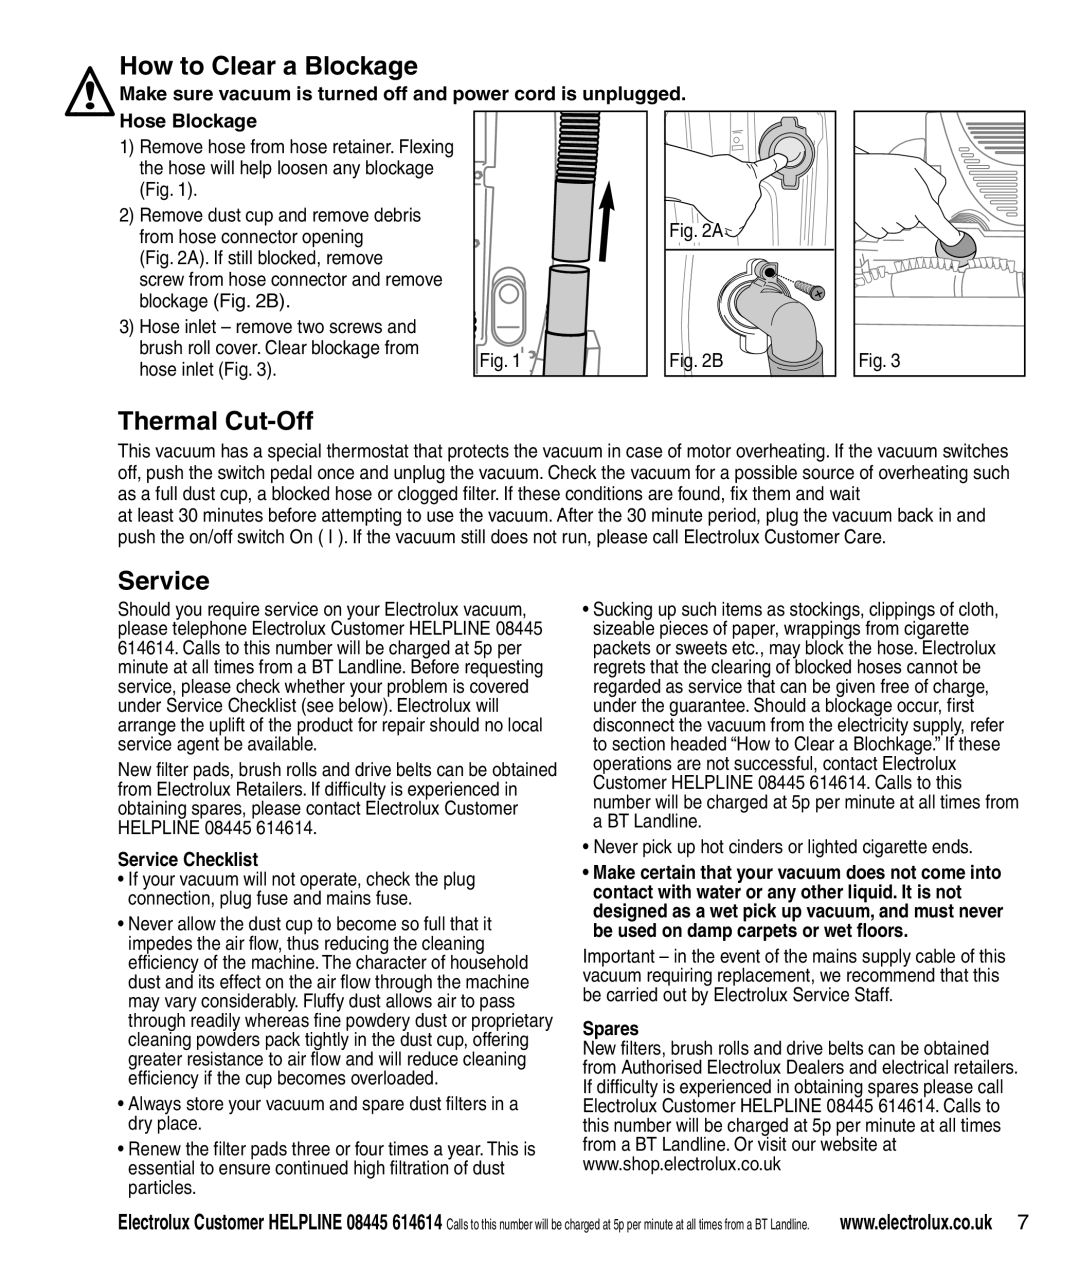 Electrolux Z3040 Series manual How to Clear a Blockage, Thermal Cut-Off, Hose Blockage, Service Checklist, Spares 